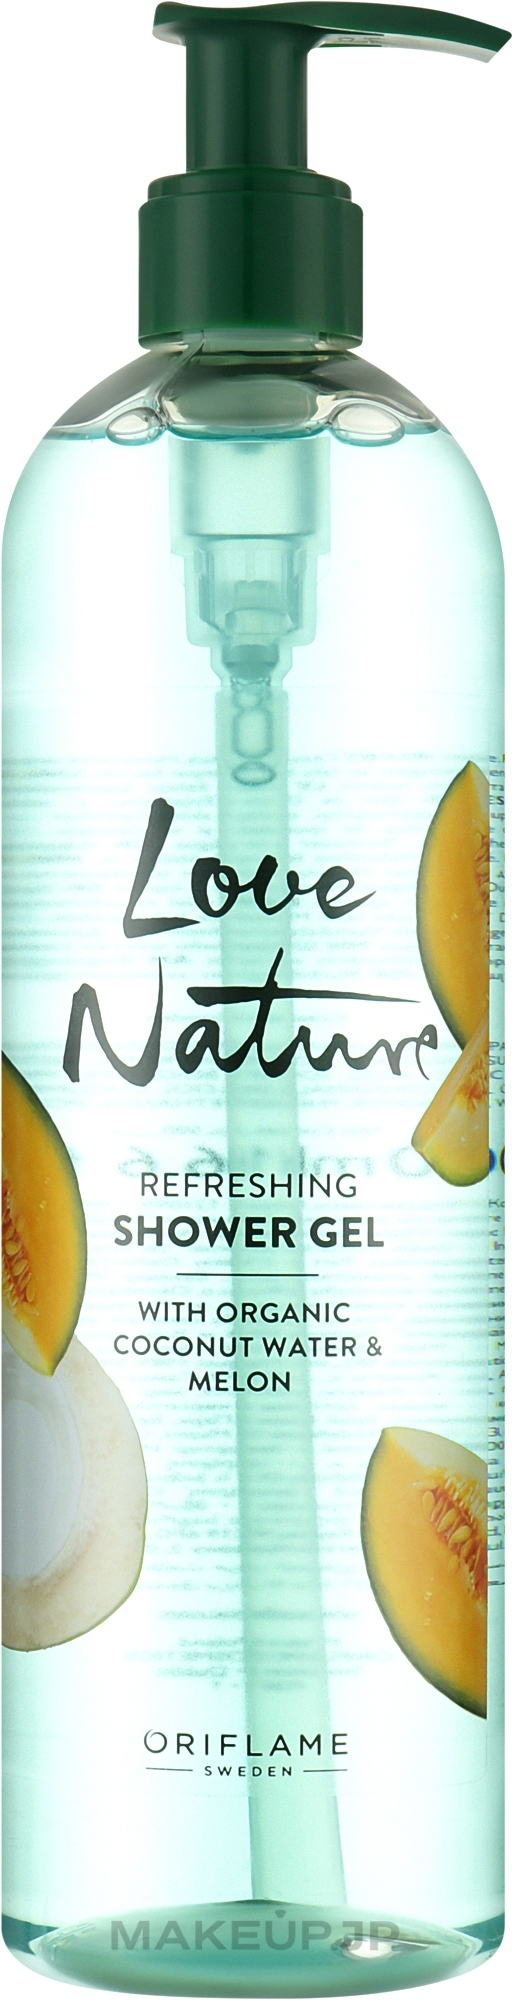 Energizing Shower Gel with Organic Coconut Water & Melon - Oriflame Love Nature Organic Coconut Water & Melon Shower Gel — photo 500 ml